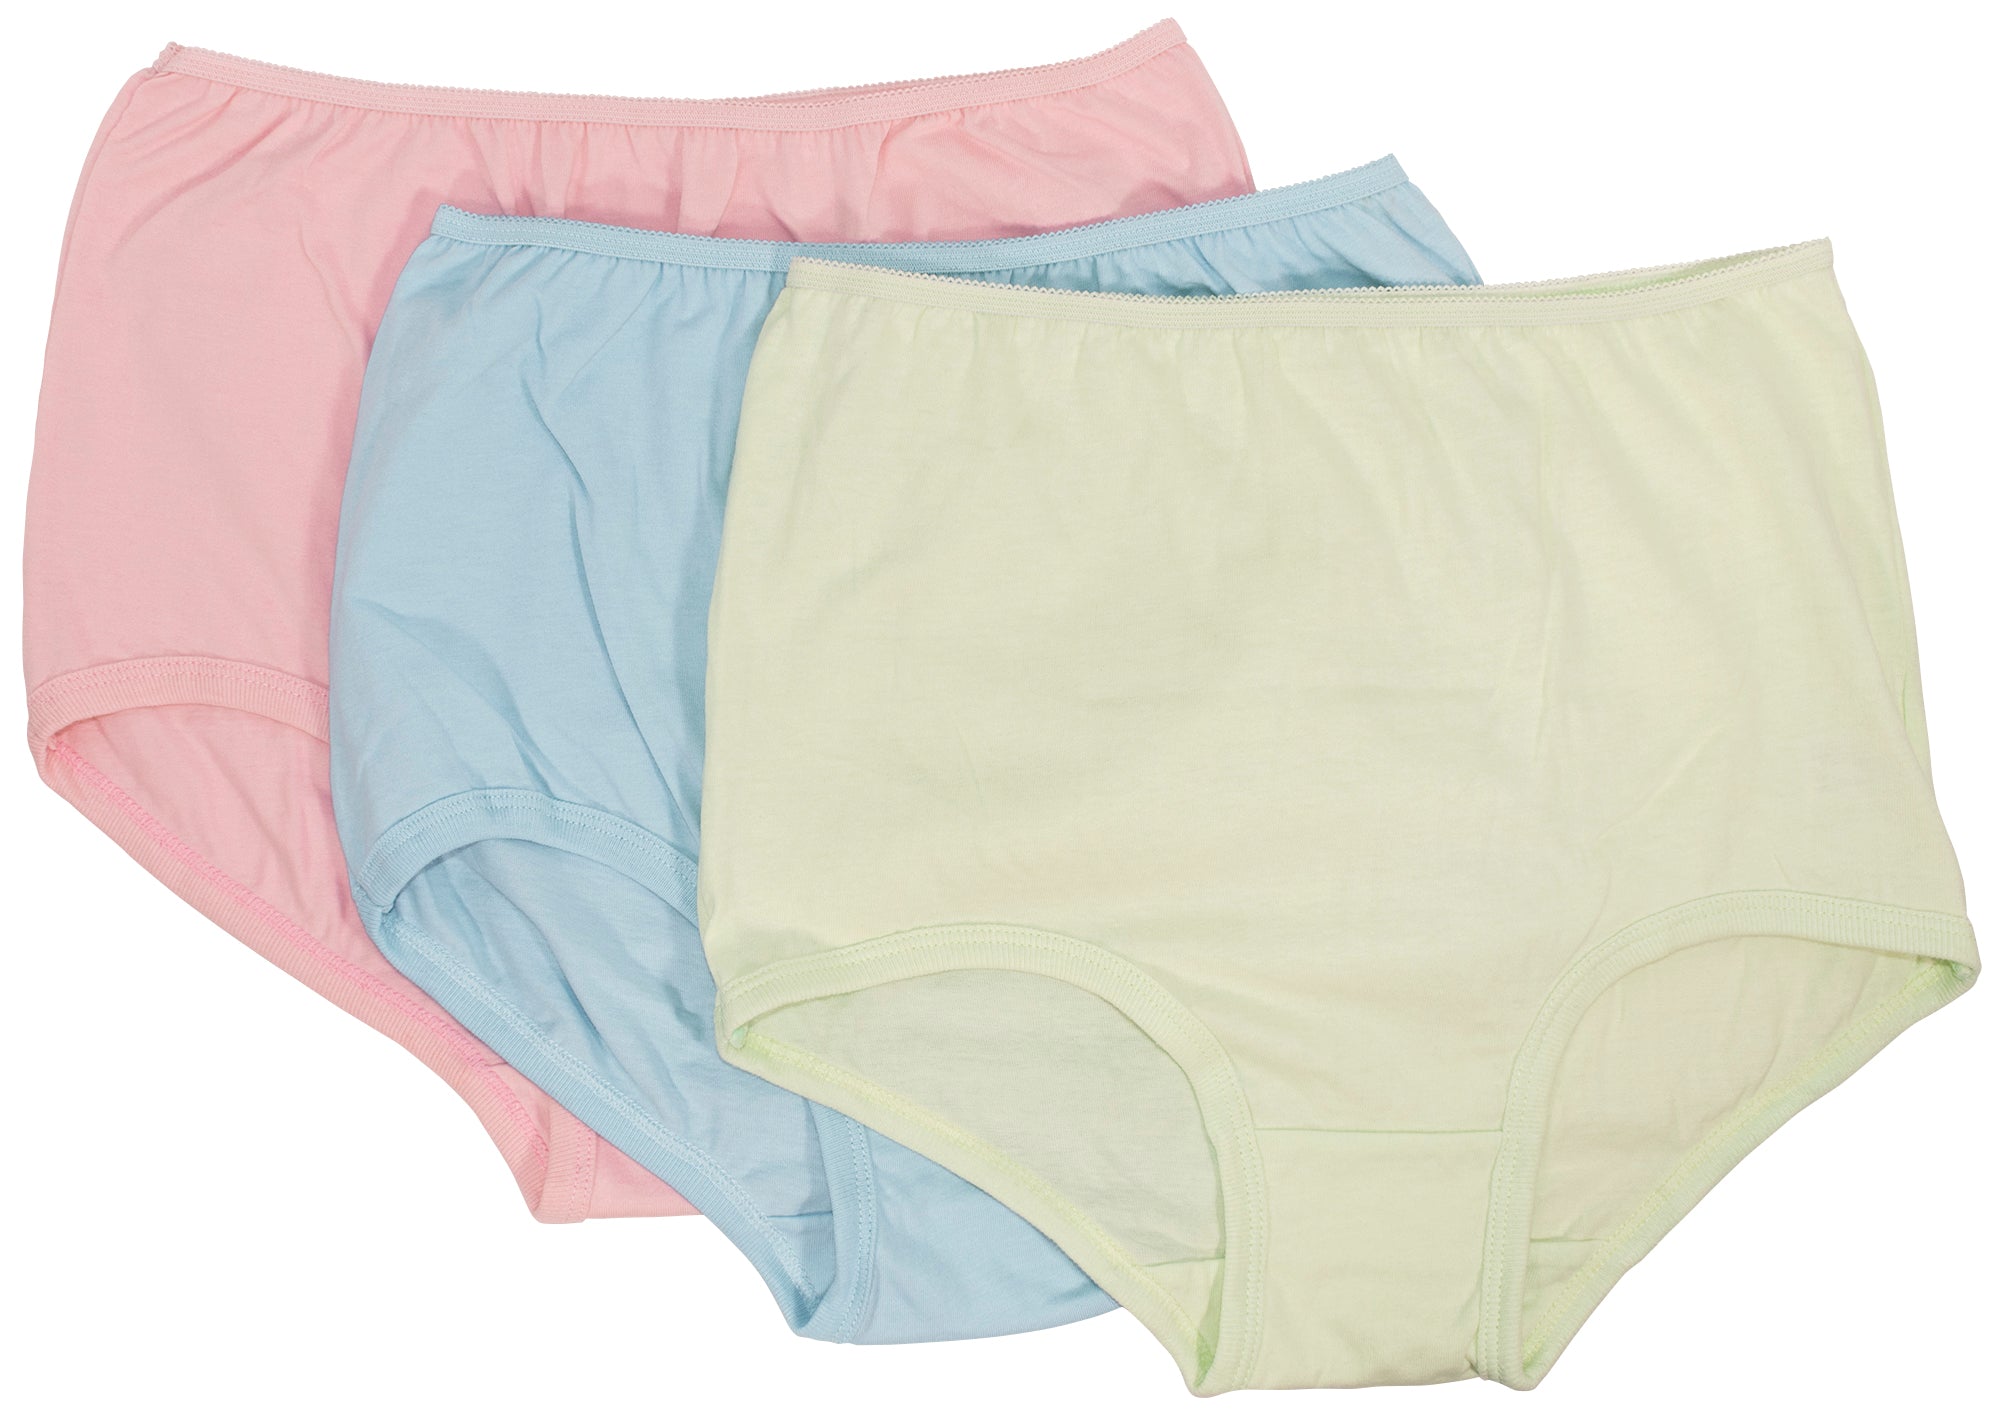 Cuff Leg Panty Assorted Color Three Pack (100% Cotton) – Teri Lingerie